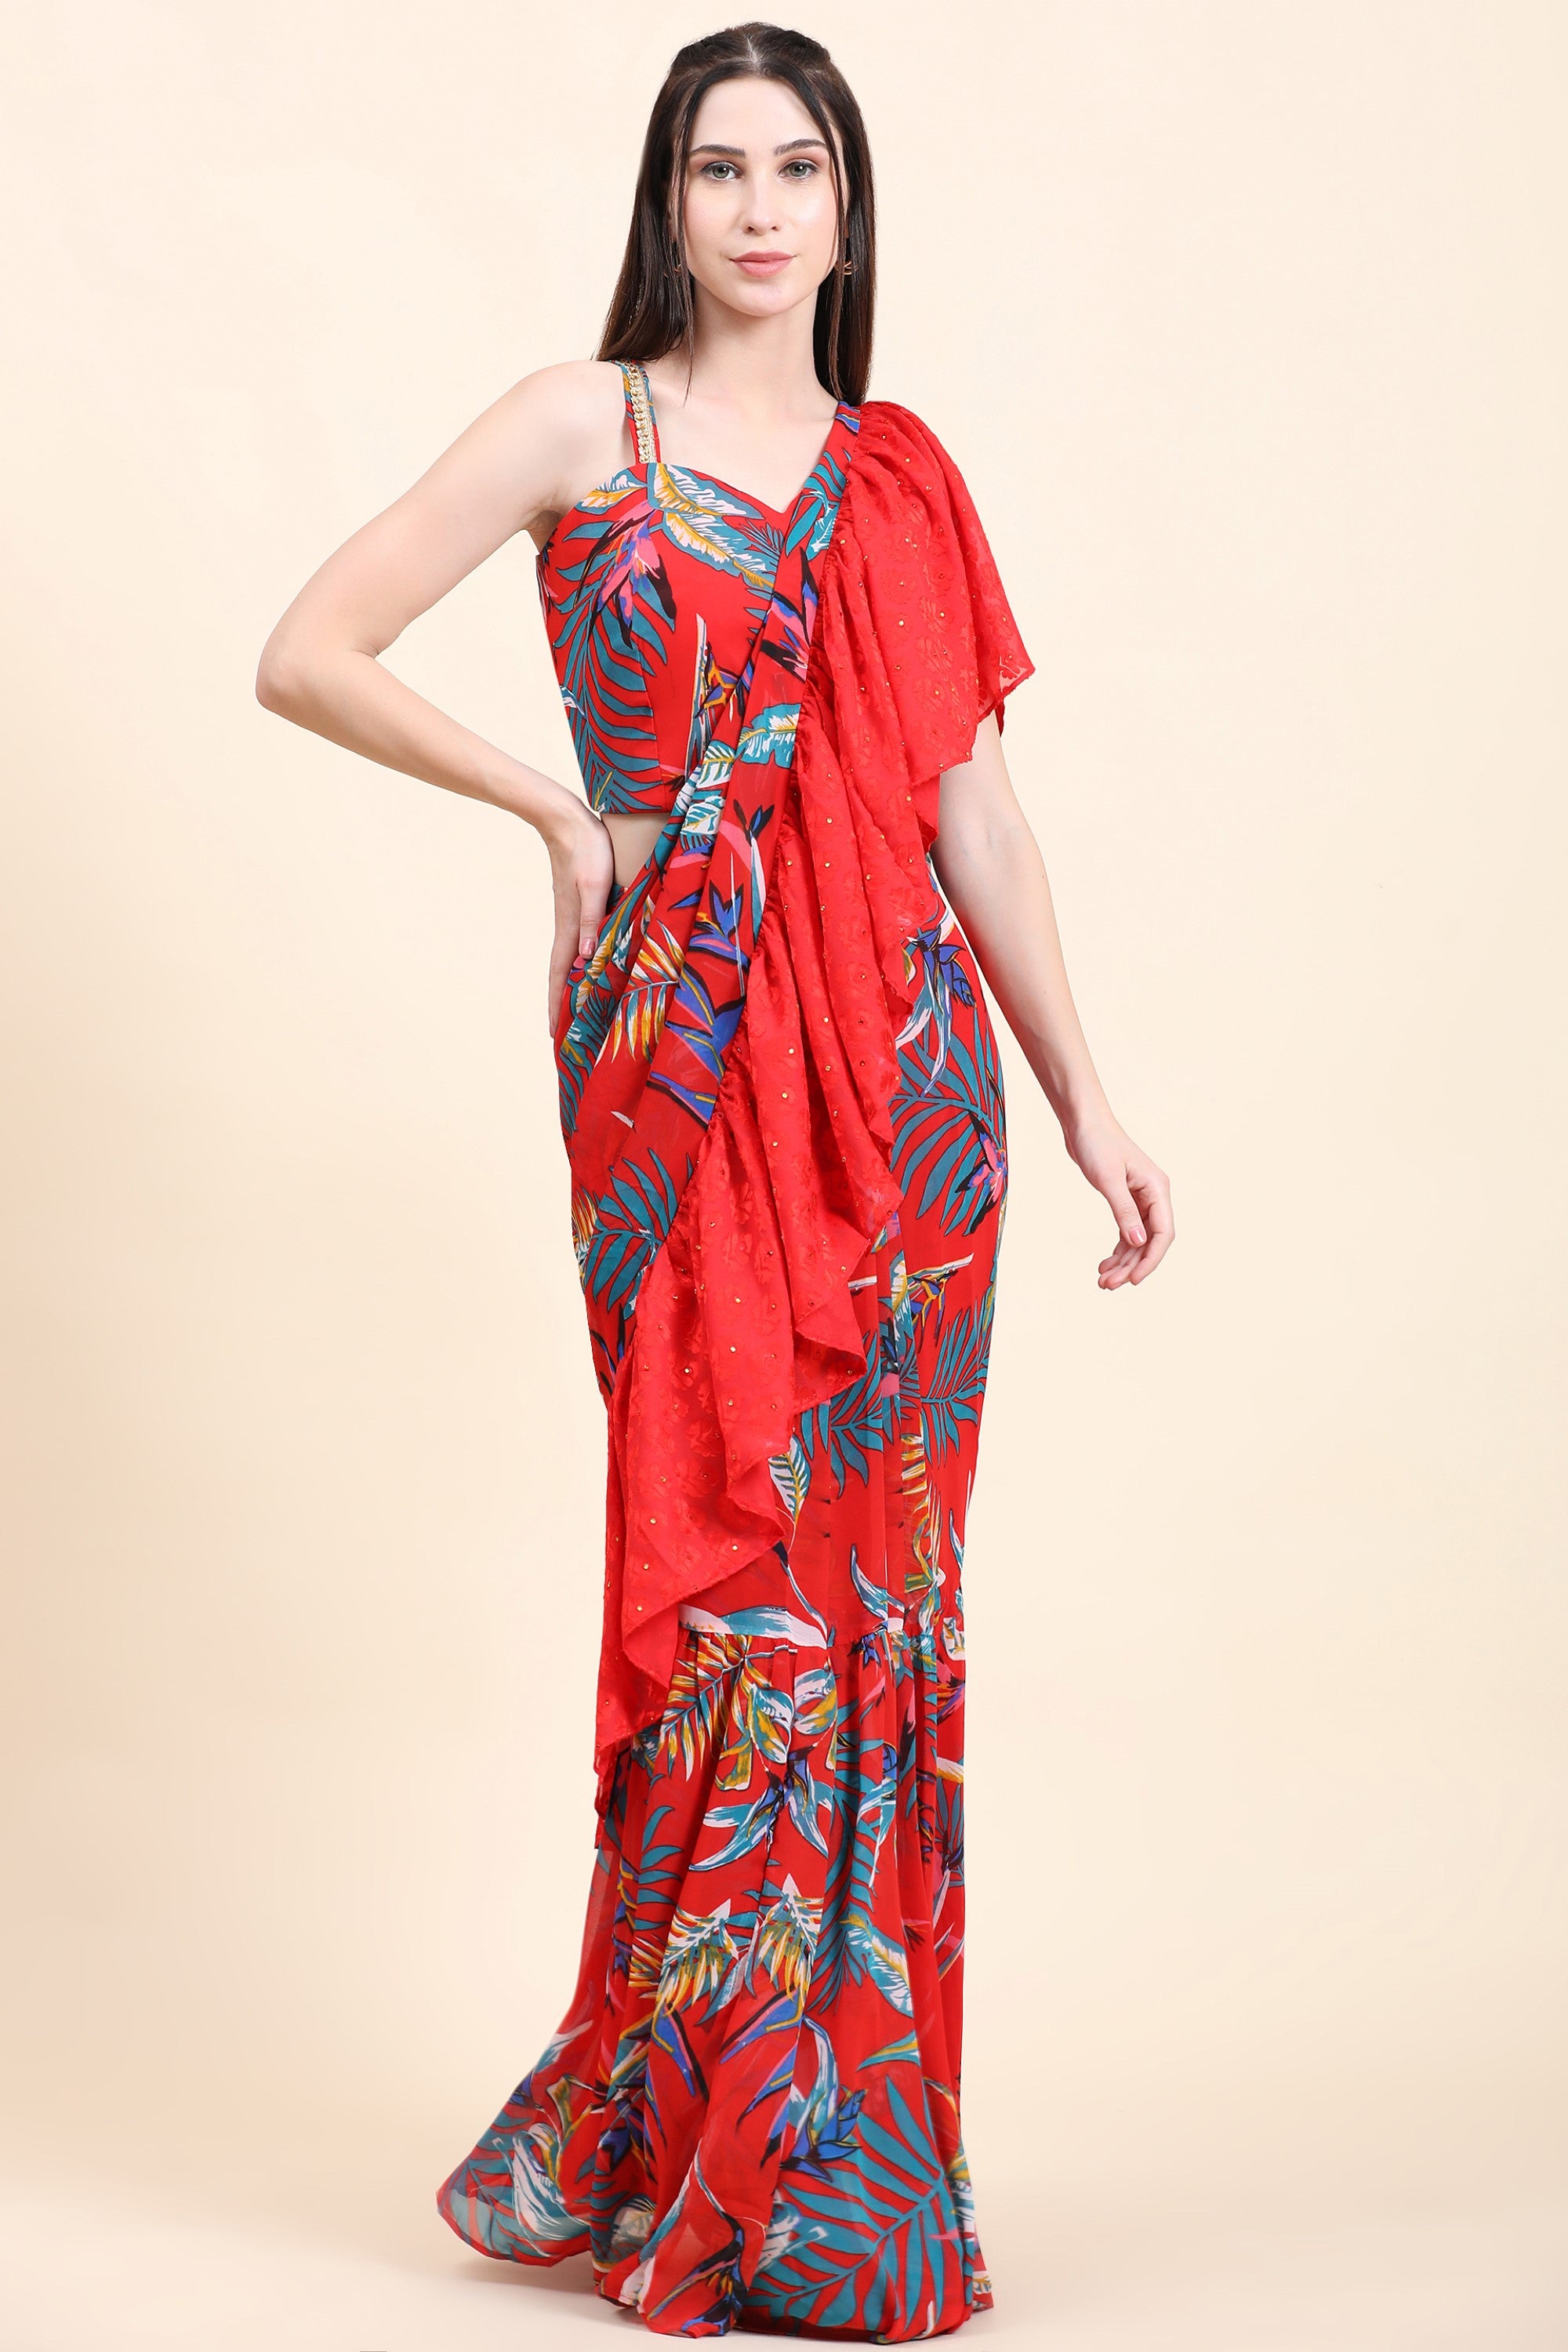 Women's Red base Leaf print Georgette Ruffle Saree, Blouse set - MIRACOLOS by Ruchi